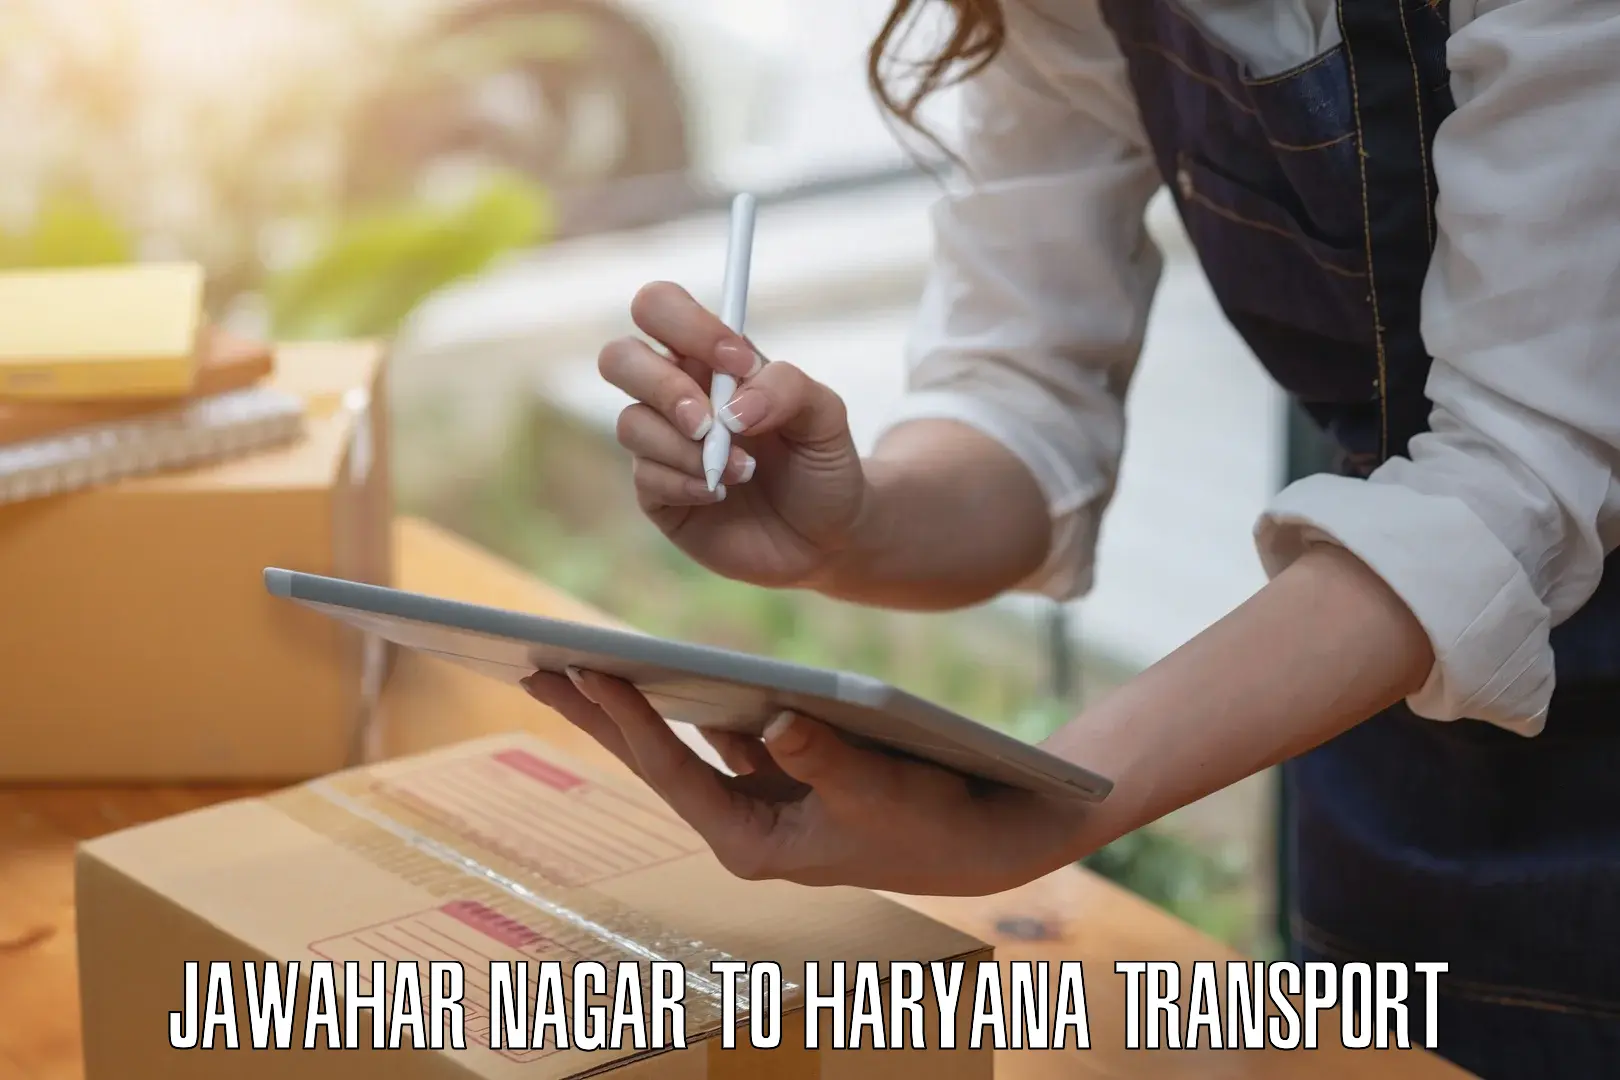 Transport bike from one state to another in Jawahar Nagar to Haryana